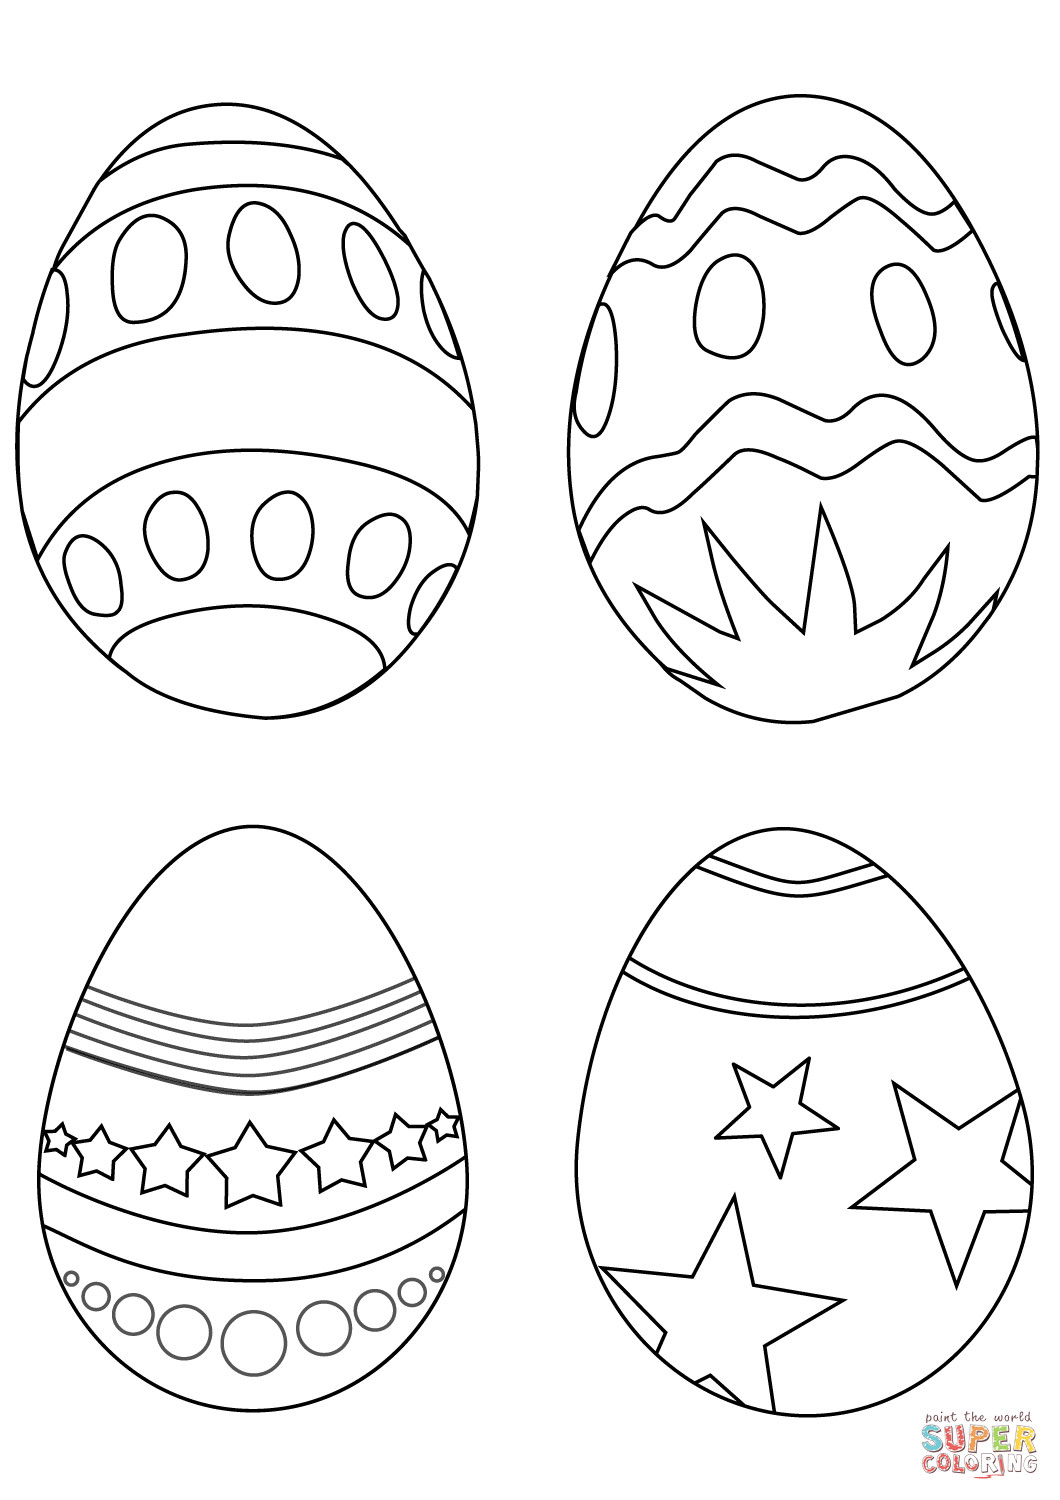 Easter Egg Coloring Pages Free Printable
 Simple Easter Eggs coloring page